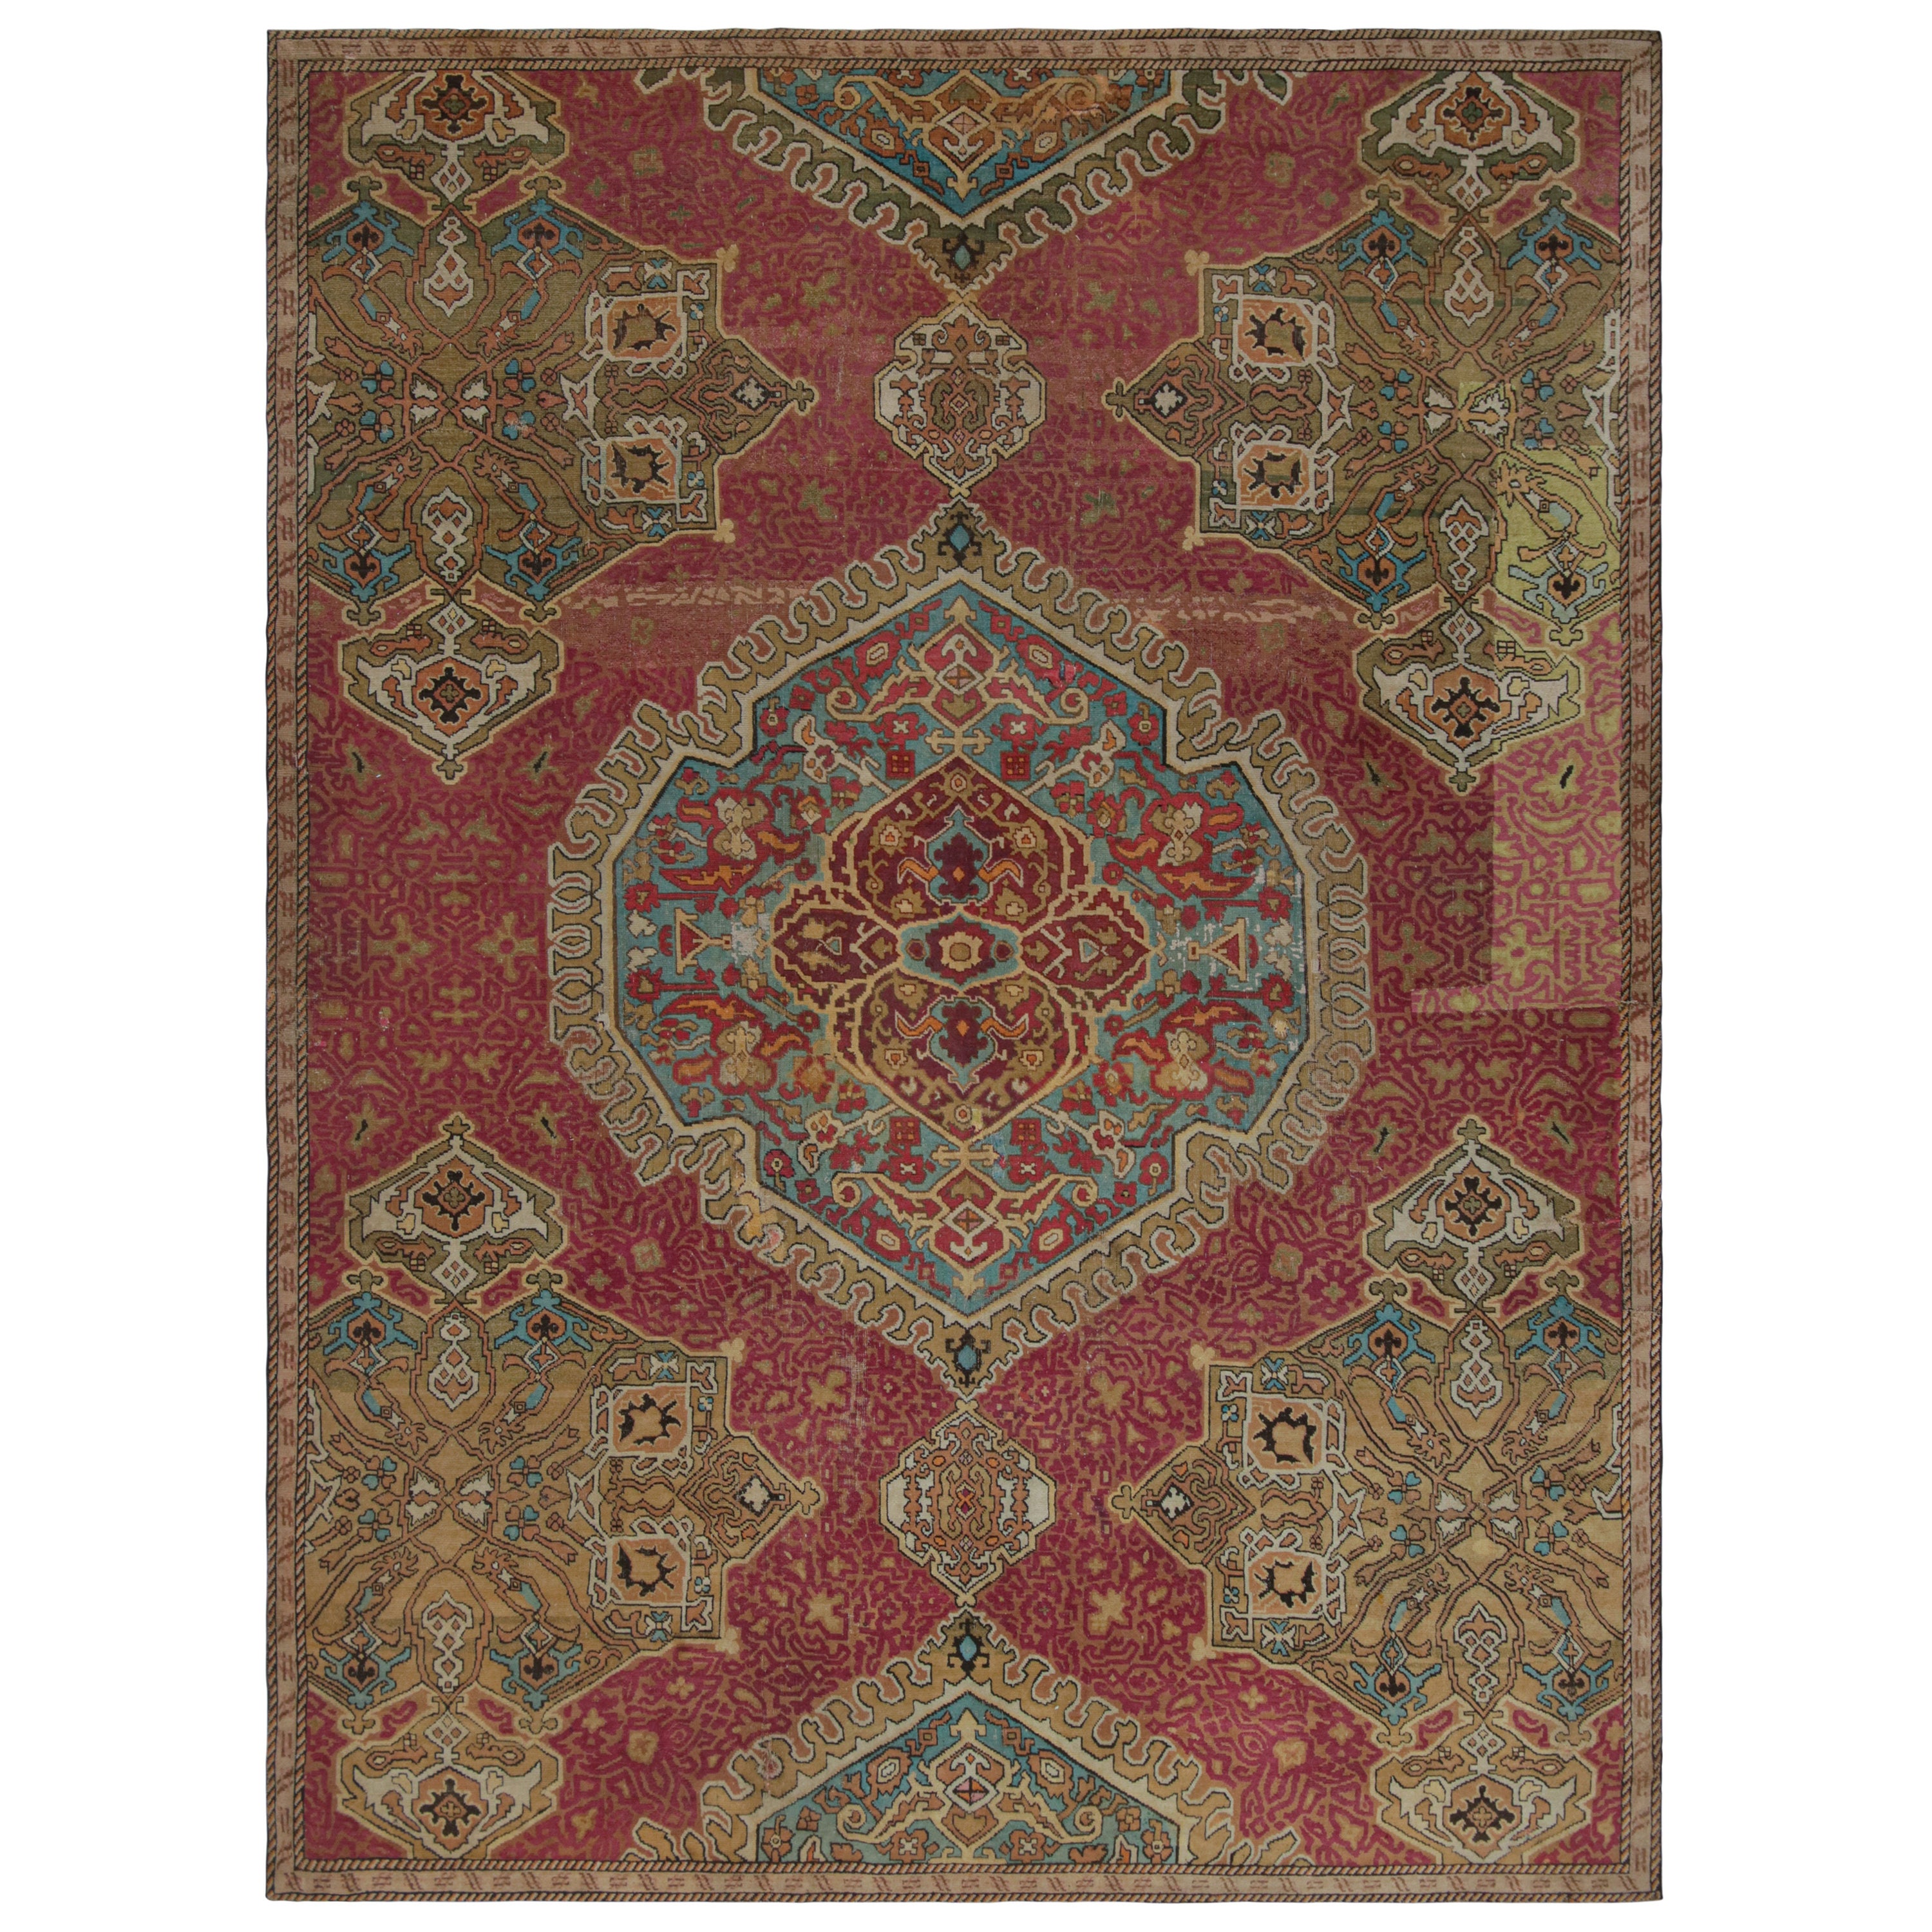 Antique Aubusson Rug in Red with Medallion Patterns, from Rug & Kilim  For Sale